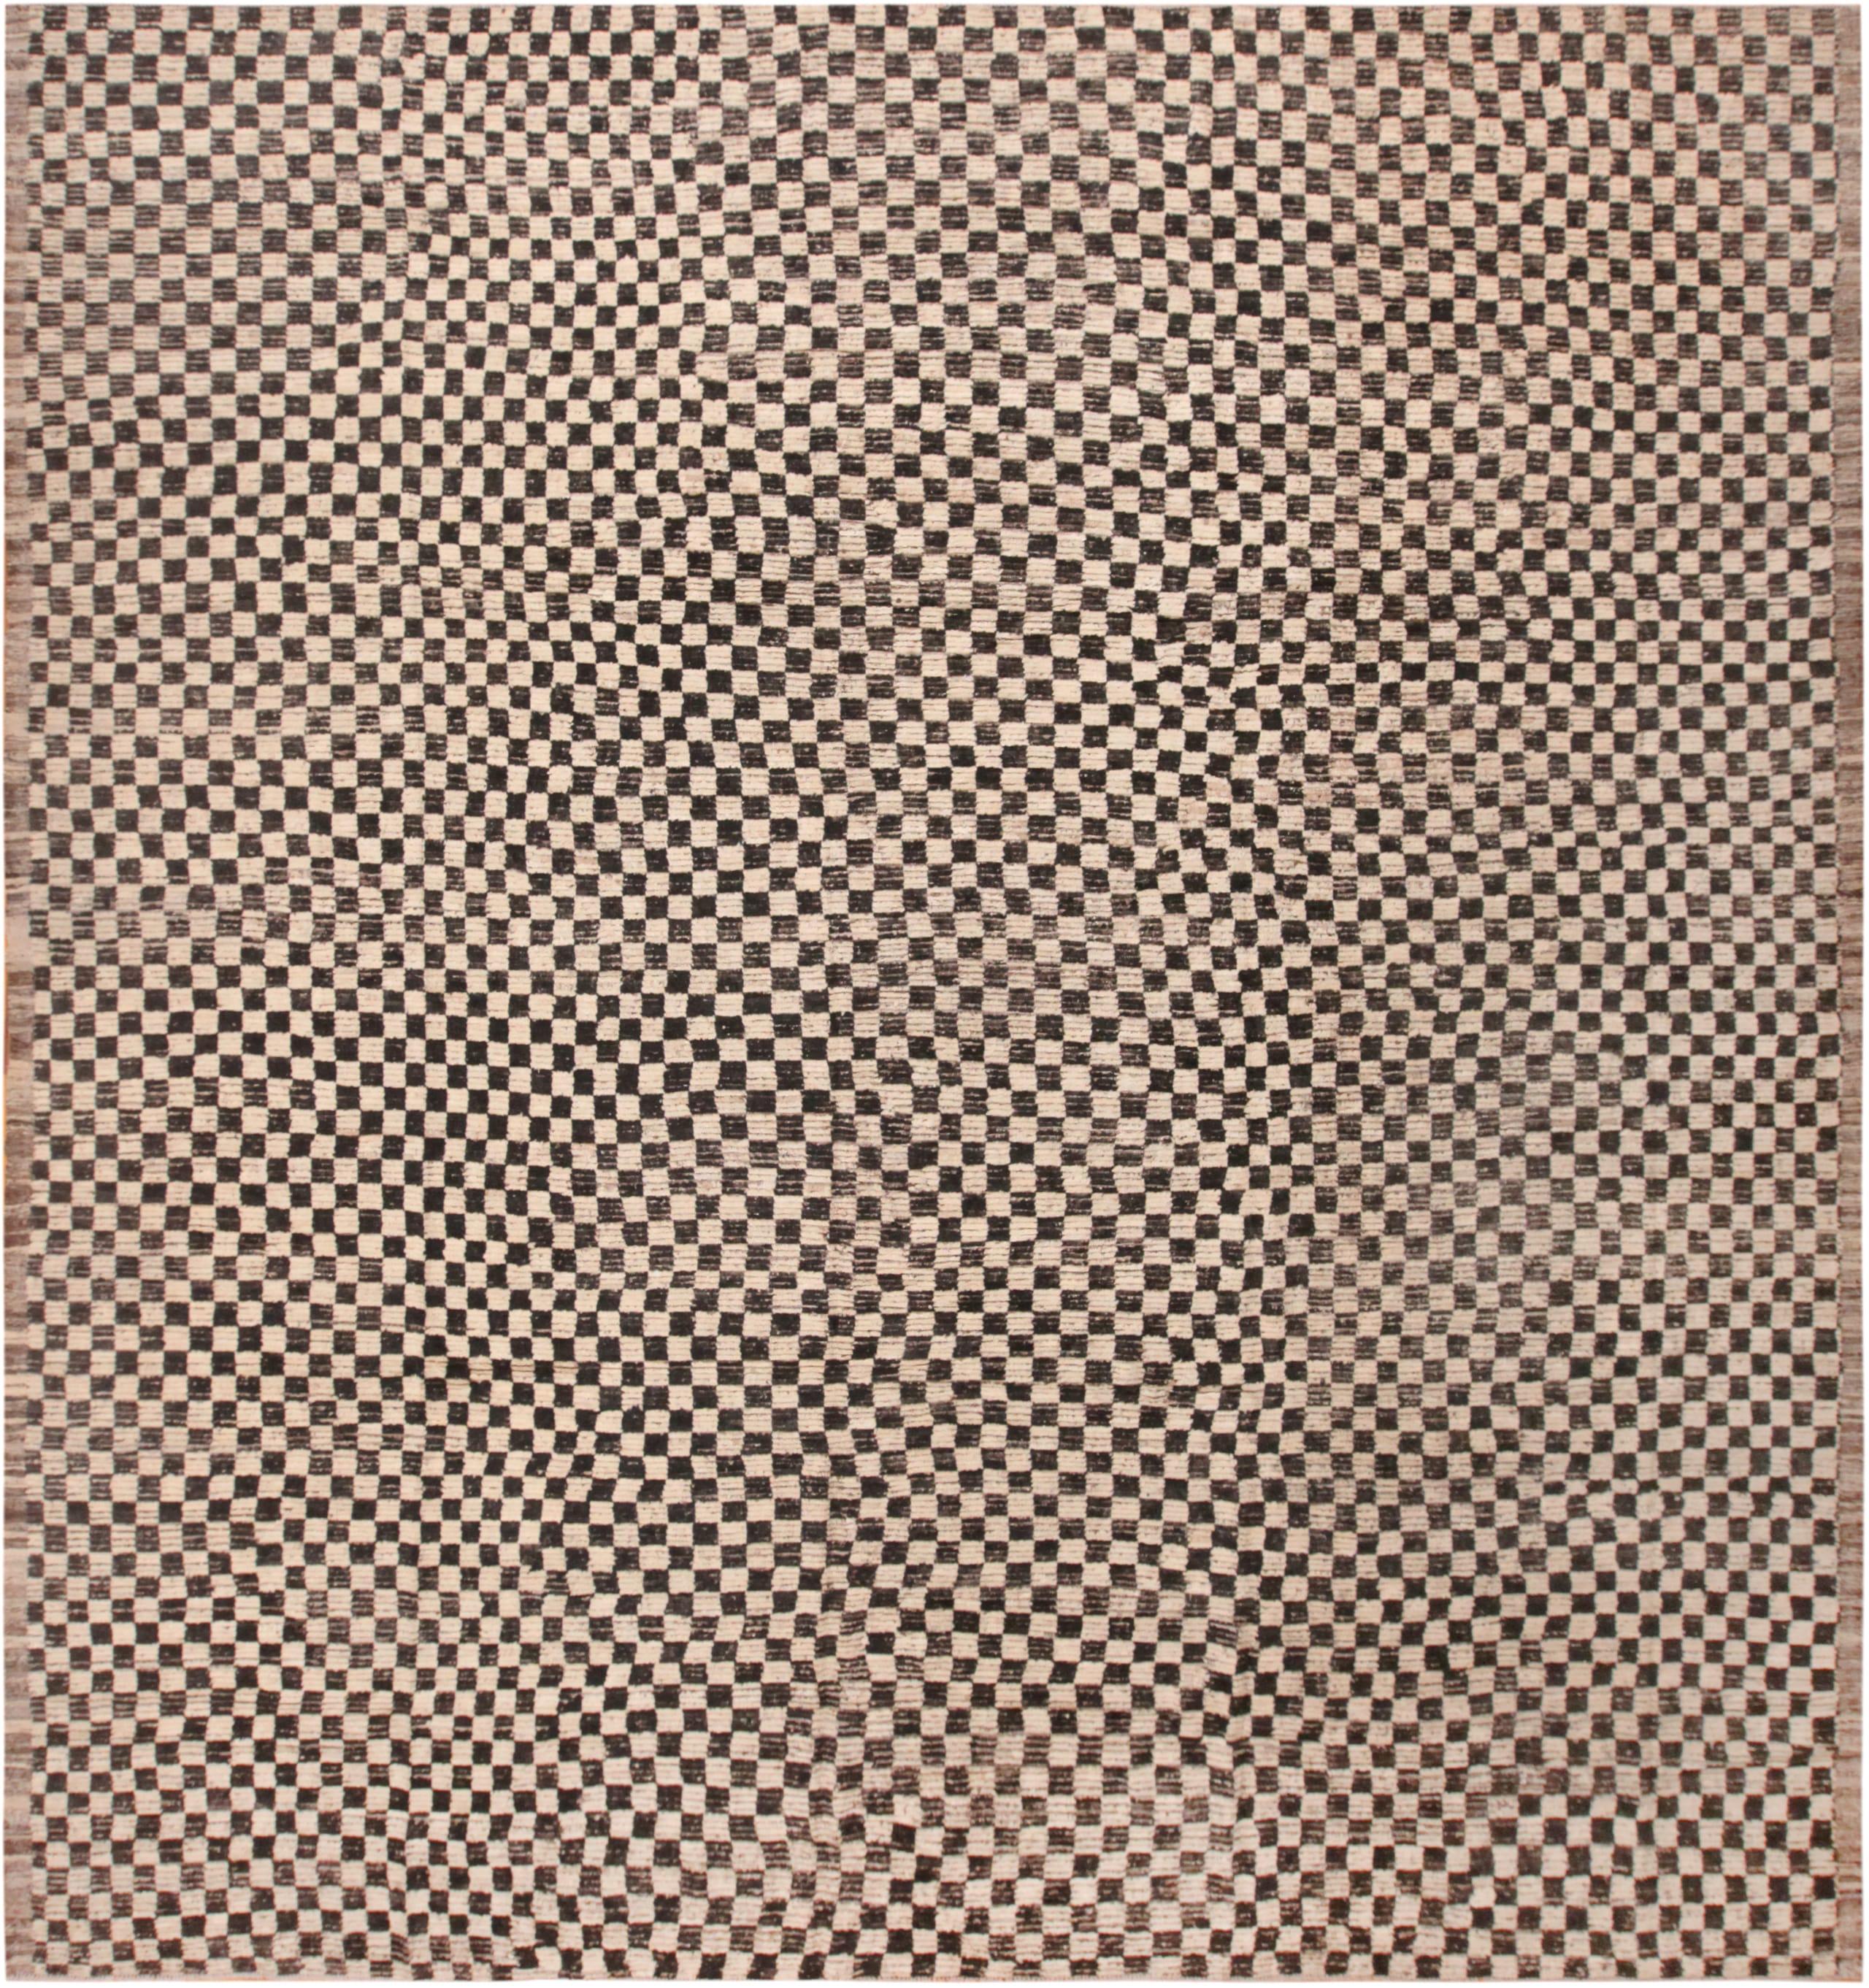 Central Asian Nazmiyal Collection Black and White Checker Design Modern Rug 14'6